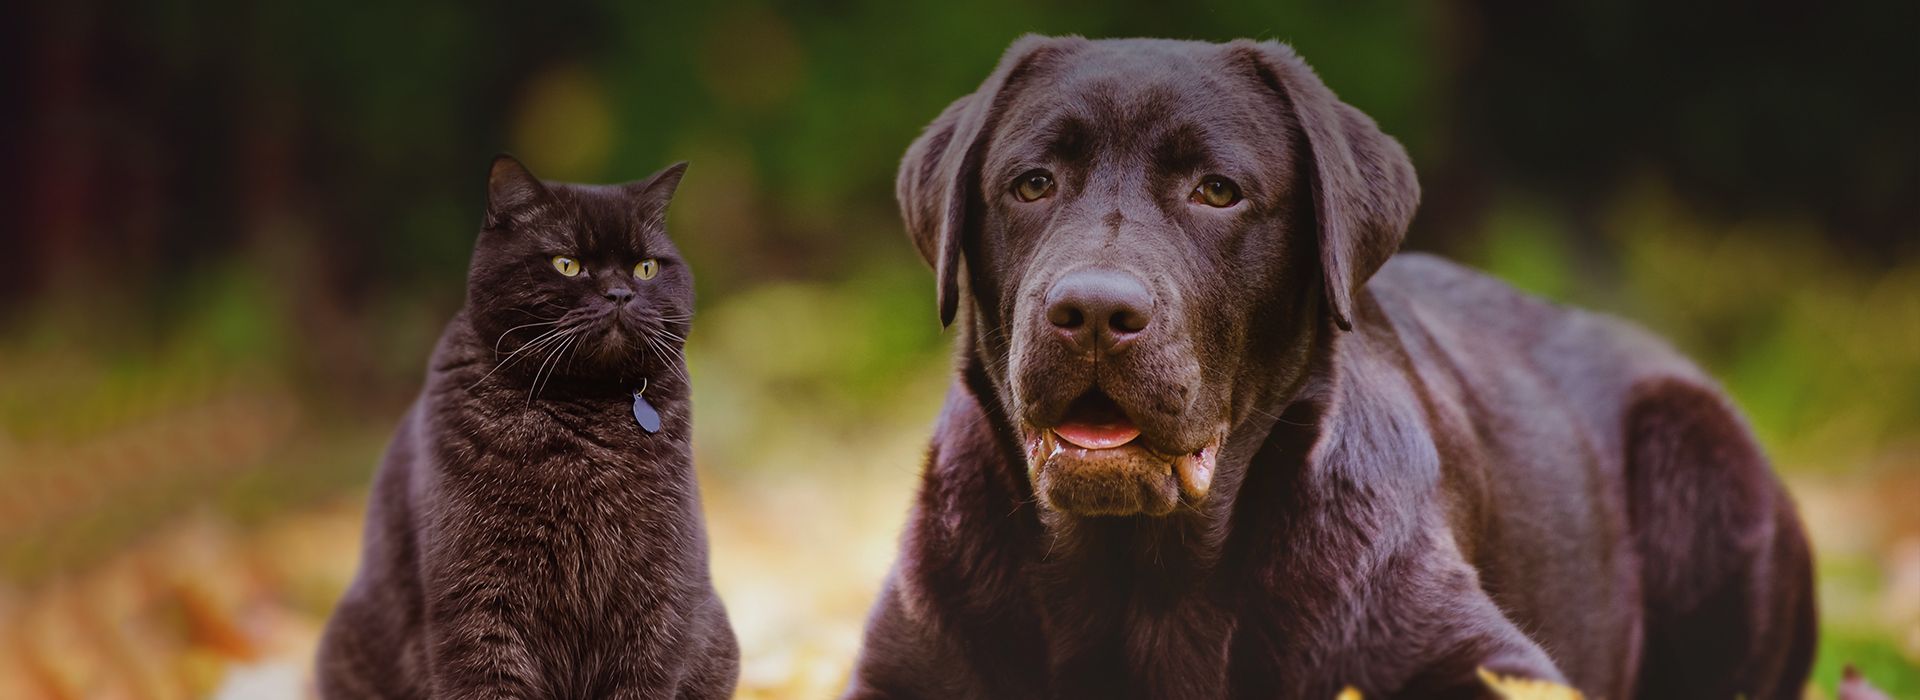 brown cat and labrador dog in the park